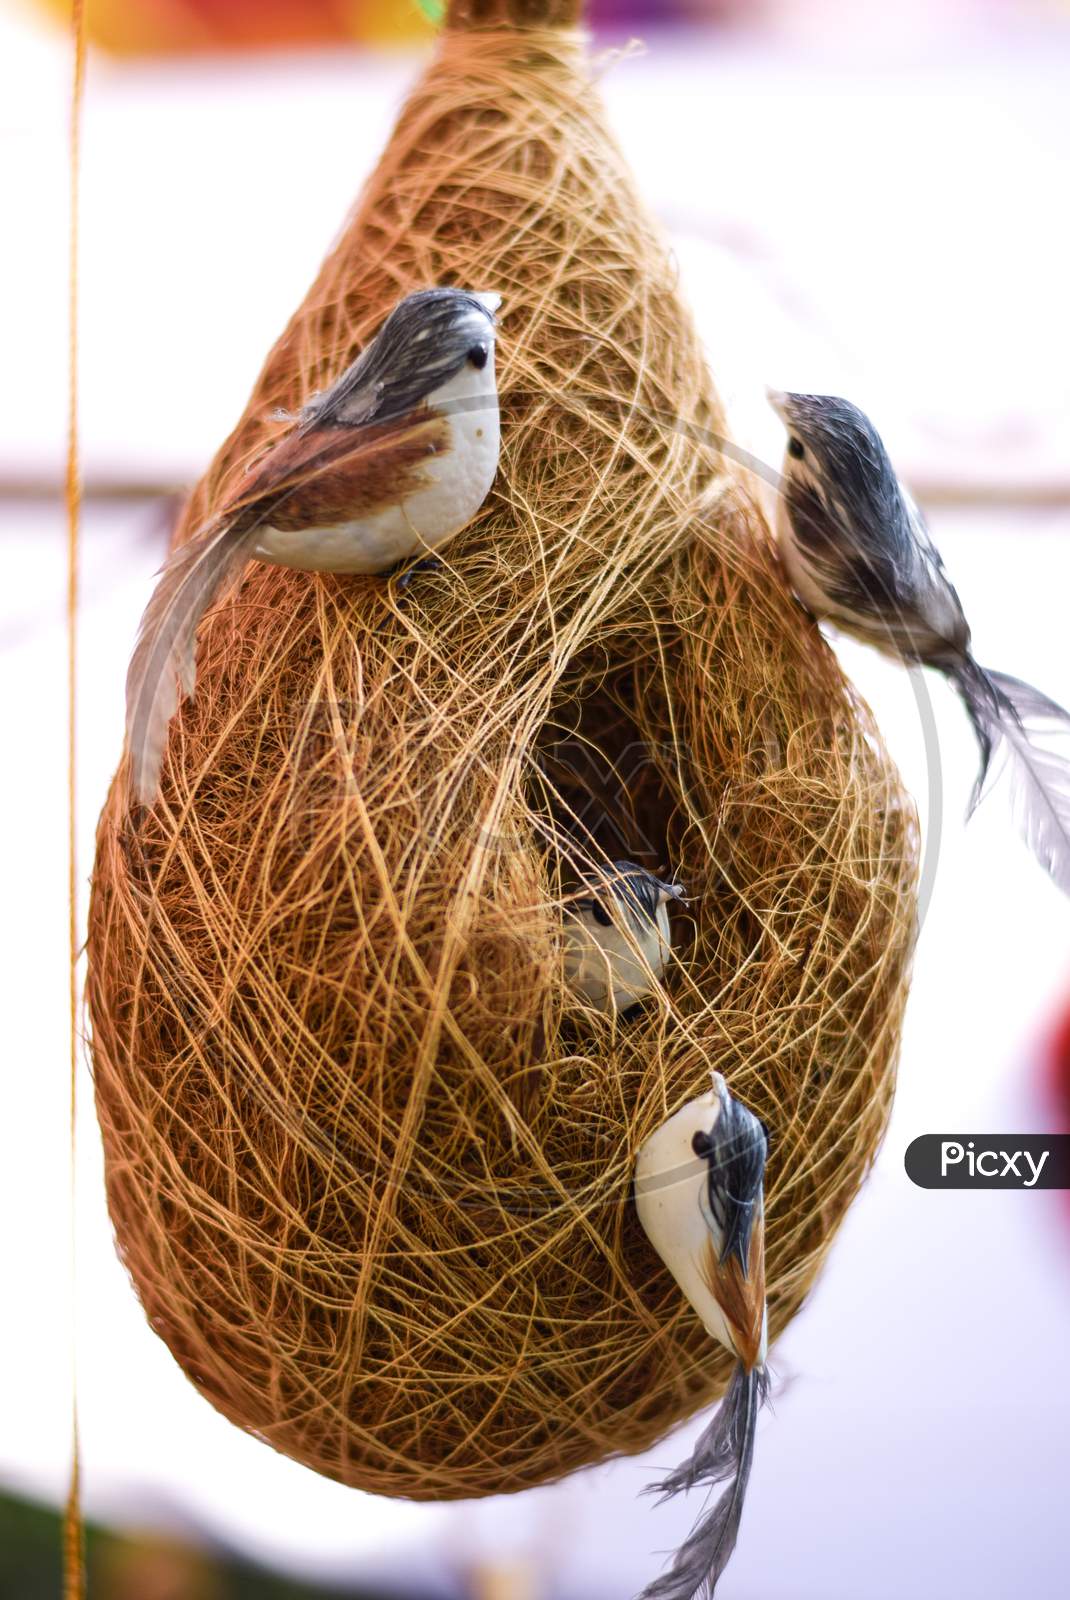 Sparrow hanging nest with multiple birds